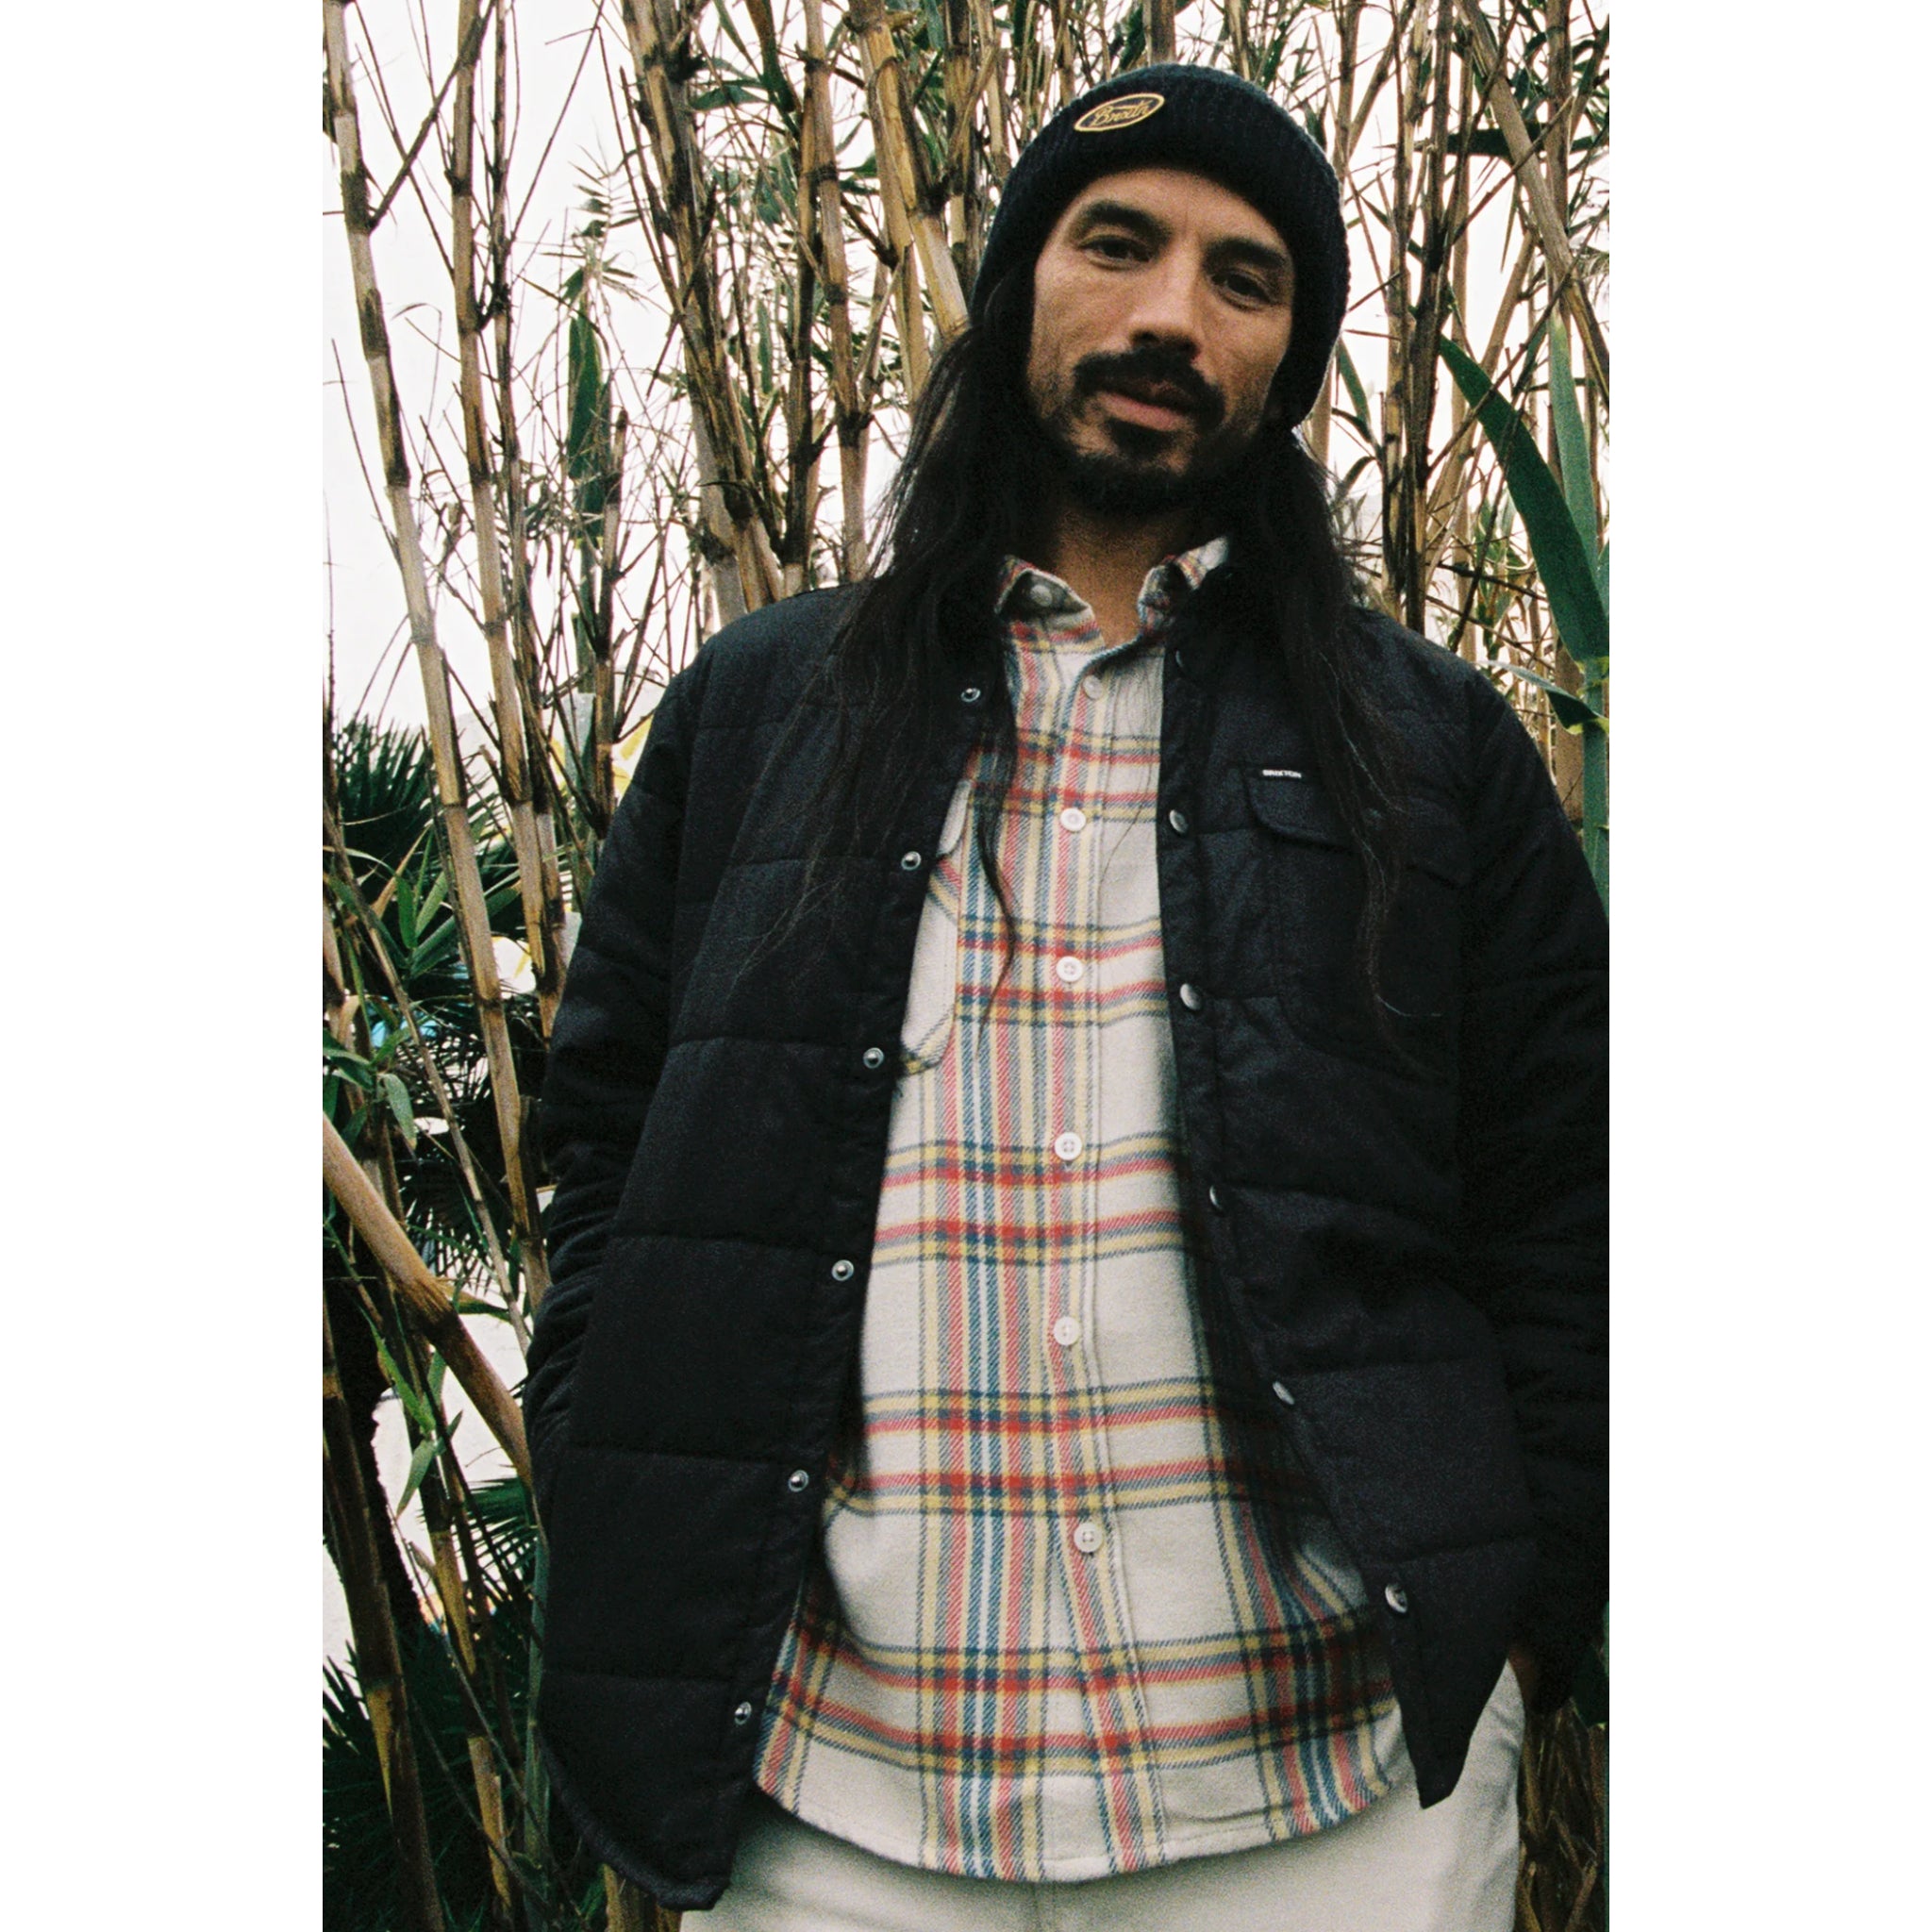 Brixton Bowery L/S Flannel